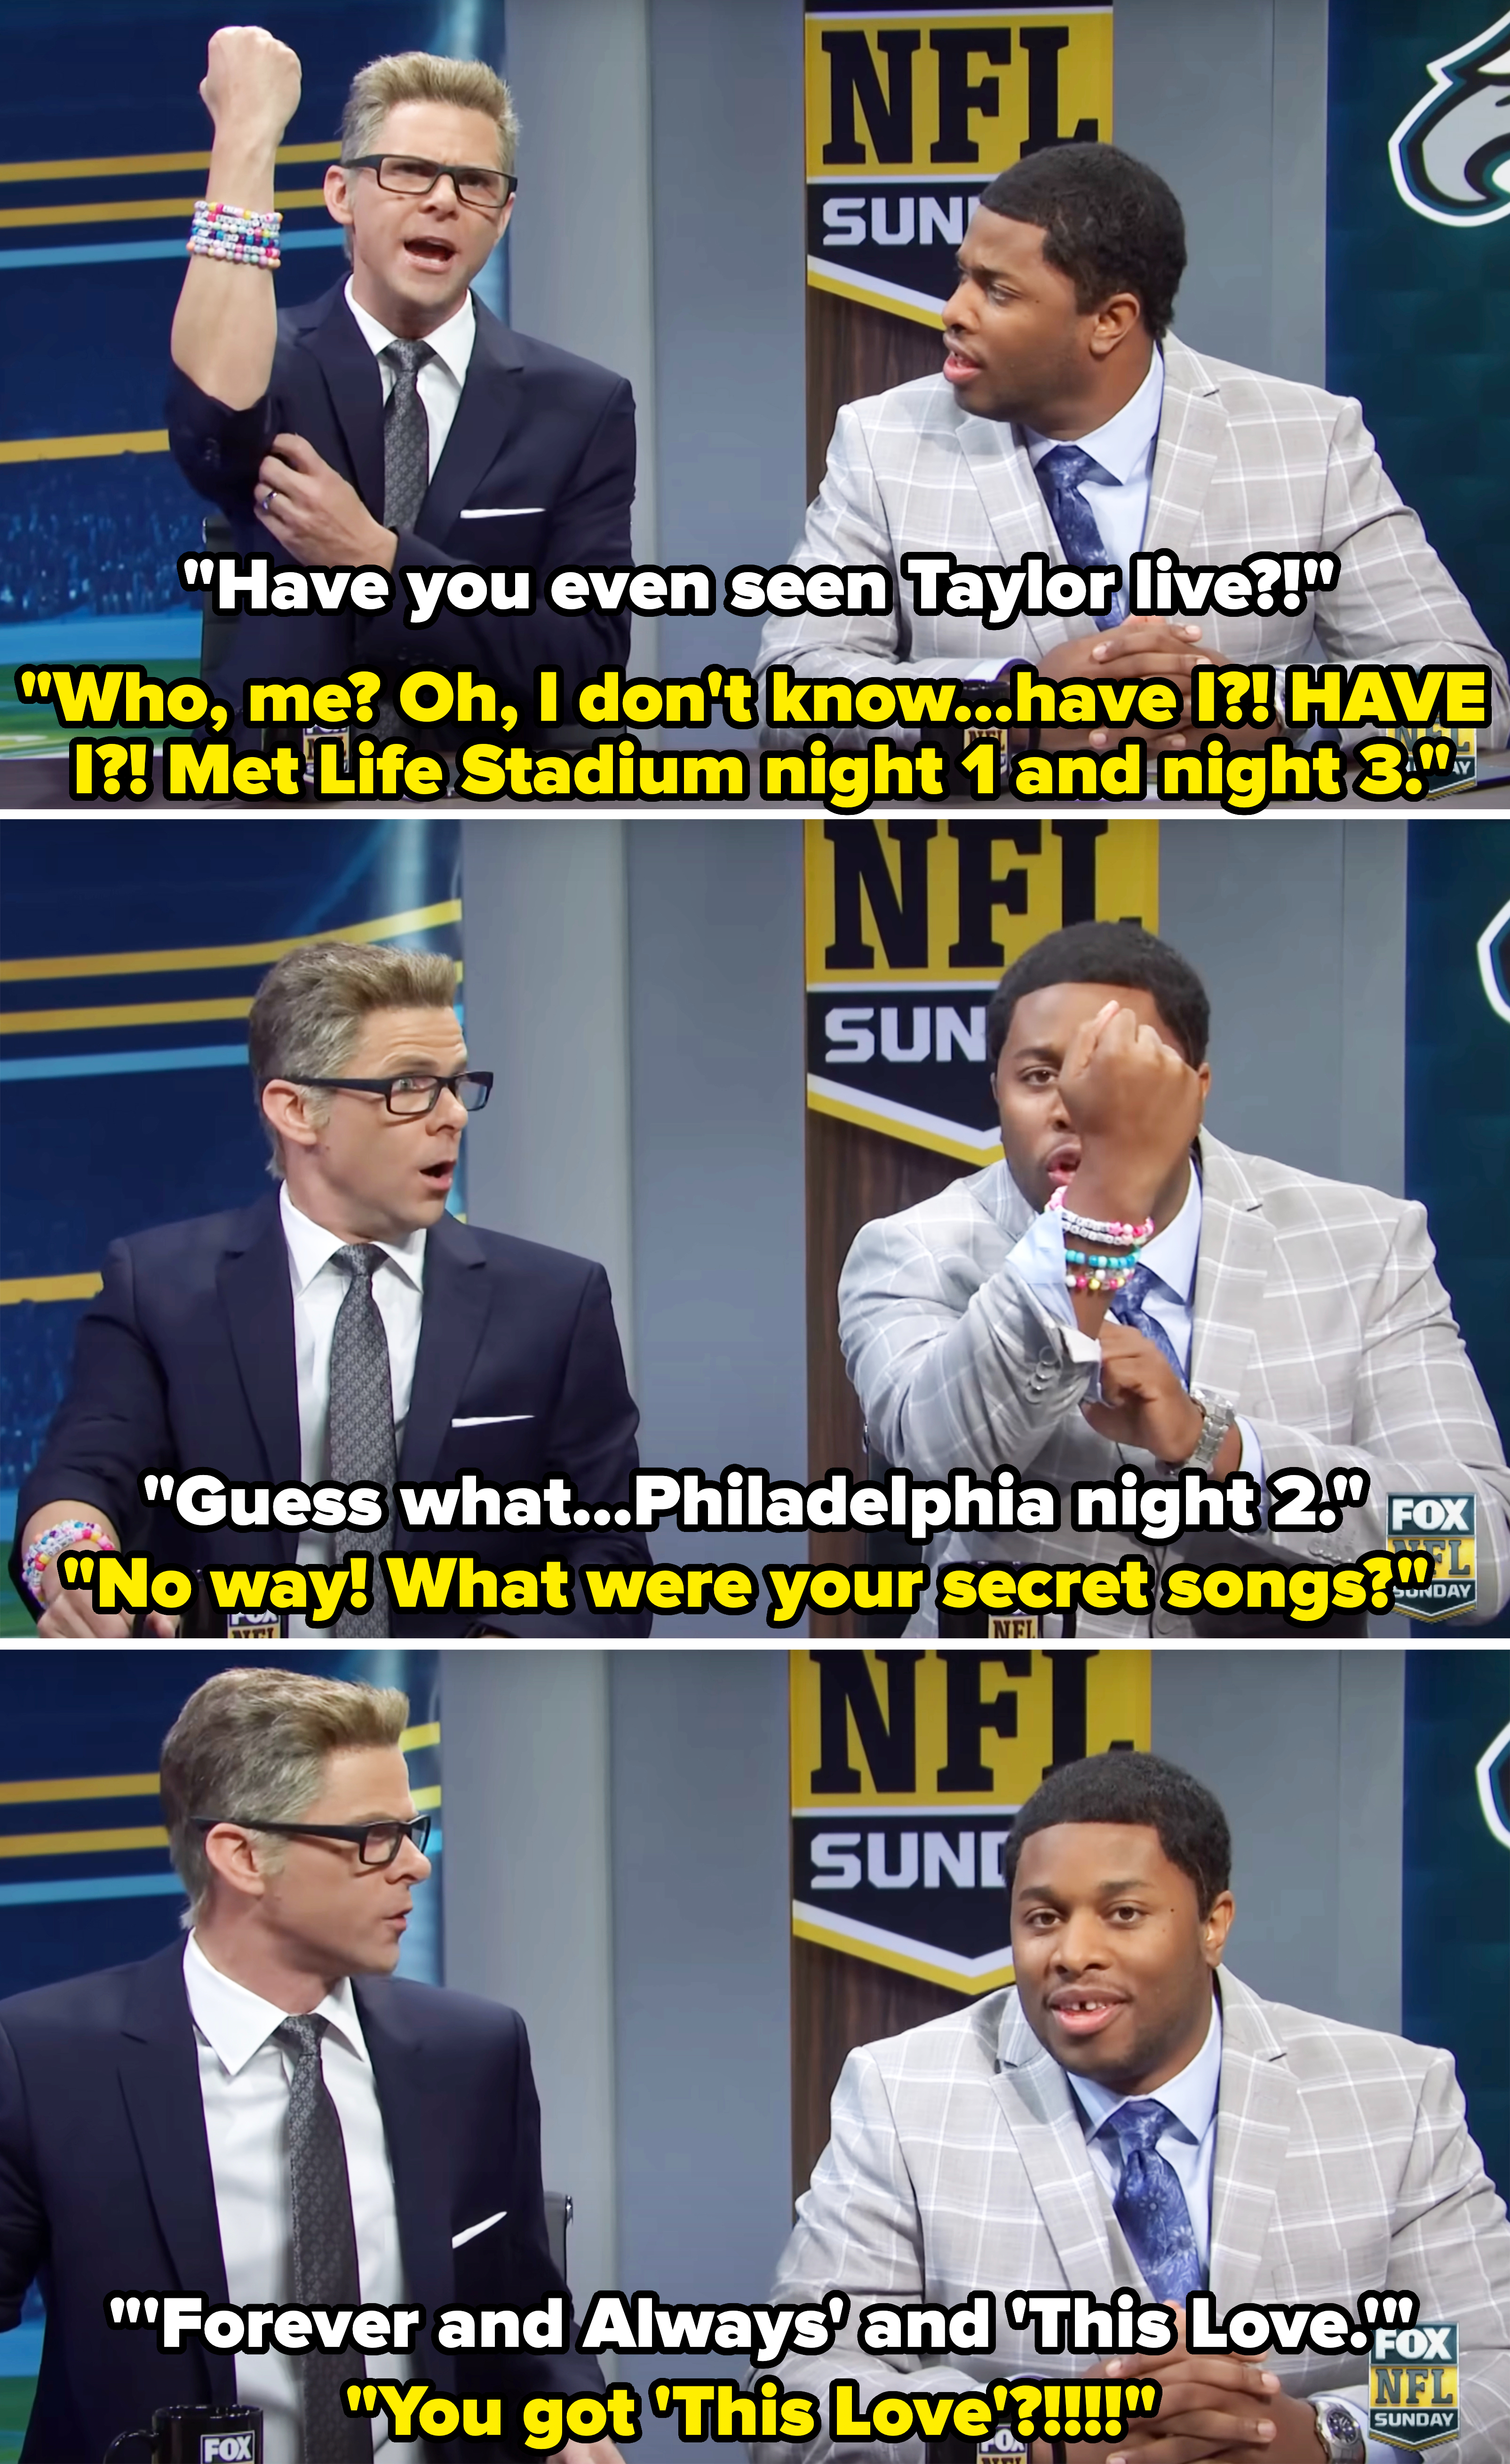 Sports anchors from the sketch asking each other if they&#x27;ve seen Taylor in concert (&quot;Who, me? Oh, I don&#x27;t know — have I?! HAVE I?! Met Life Stadium night 1 and night 3&quot;), and saying their &quot;secret songs&quot;